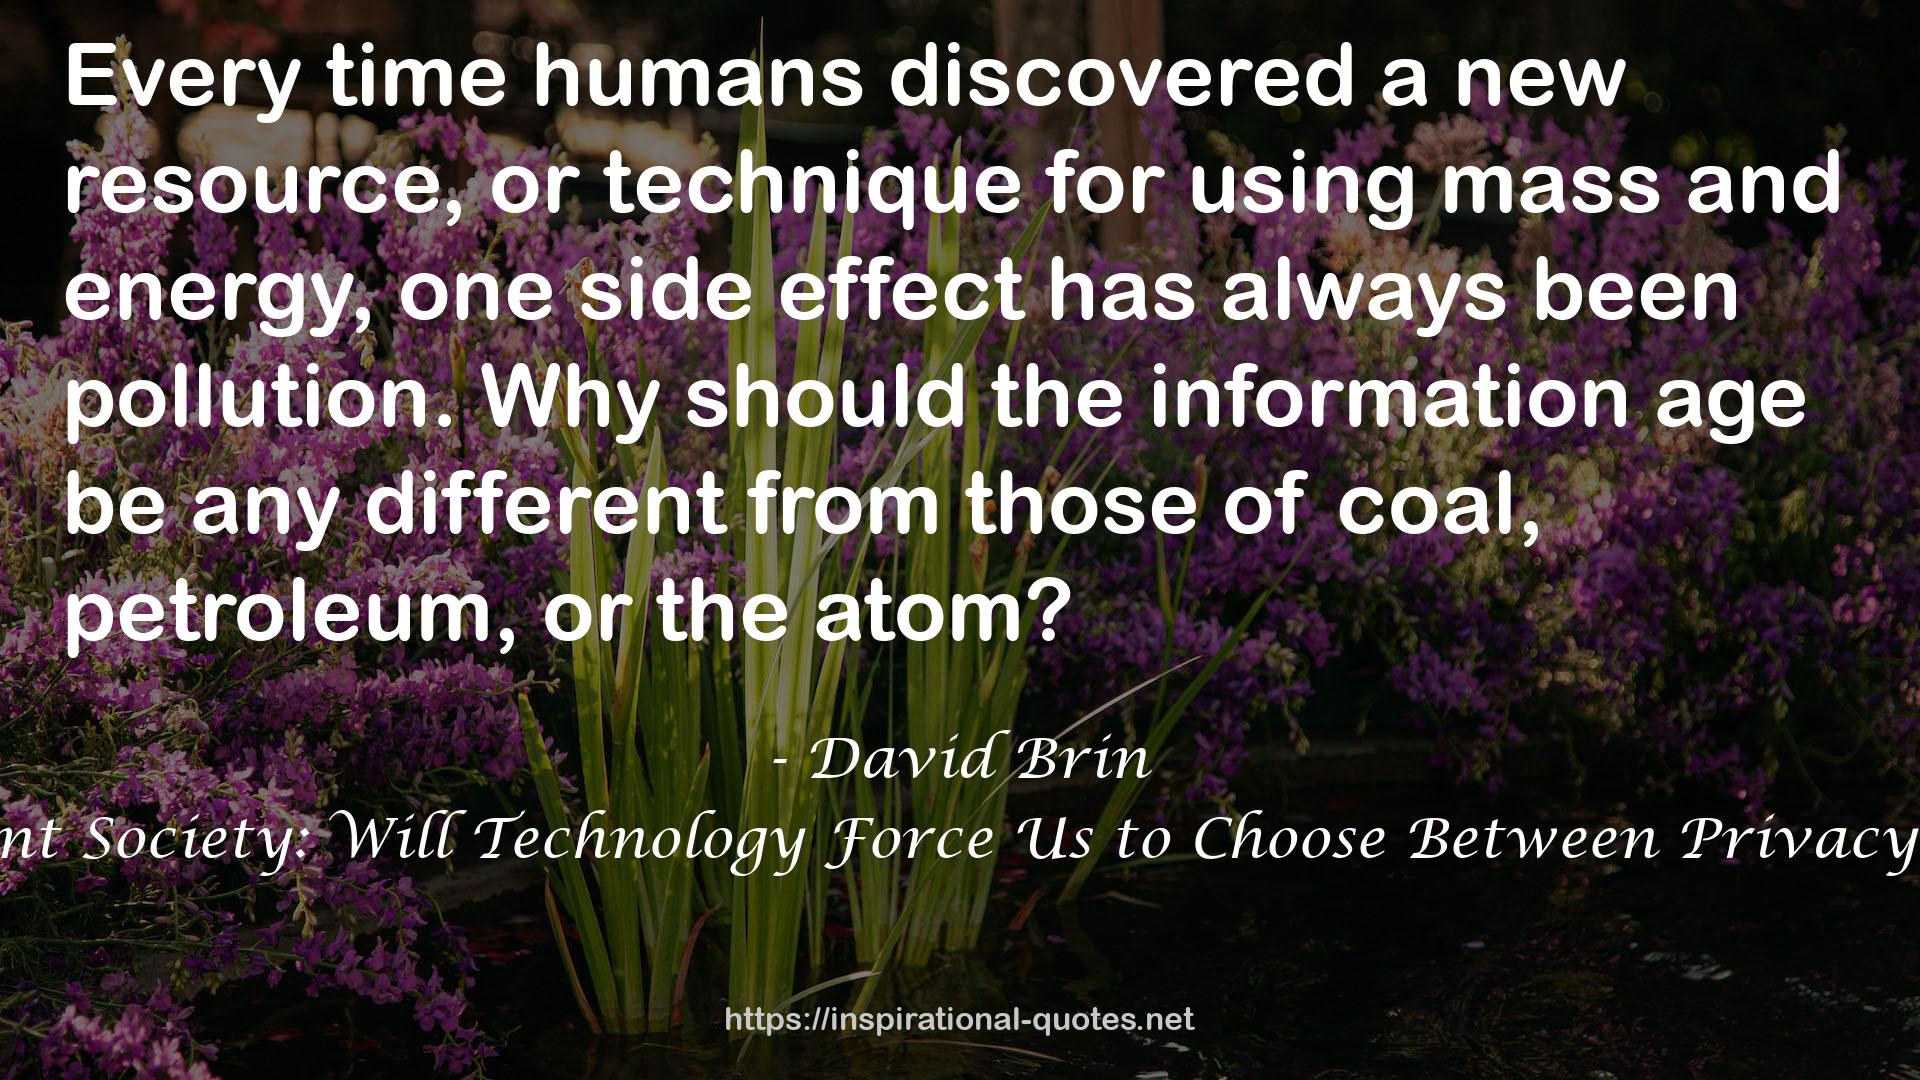 The Transparent Society: Will Technology Force Us to Choose Between Privacy and Freedom? QUOTES